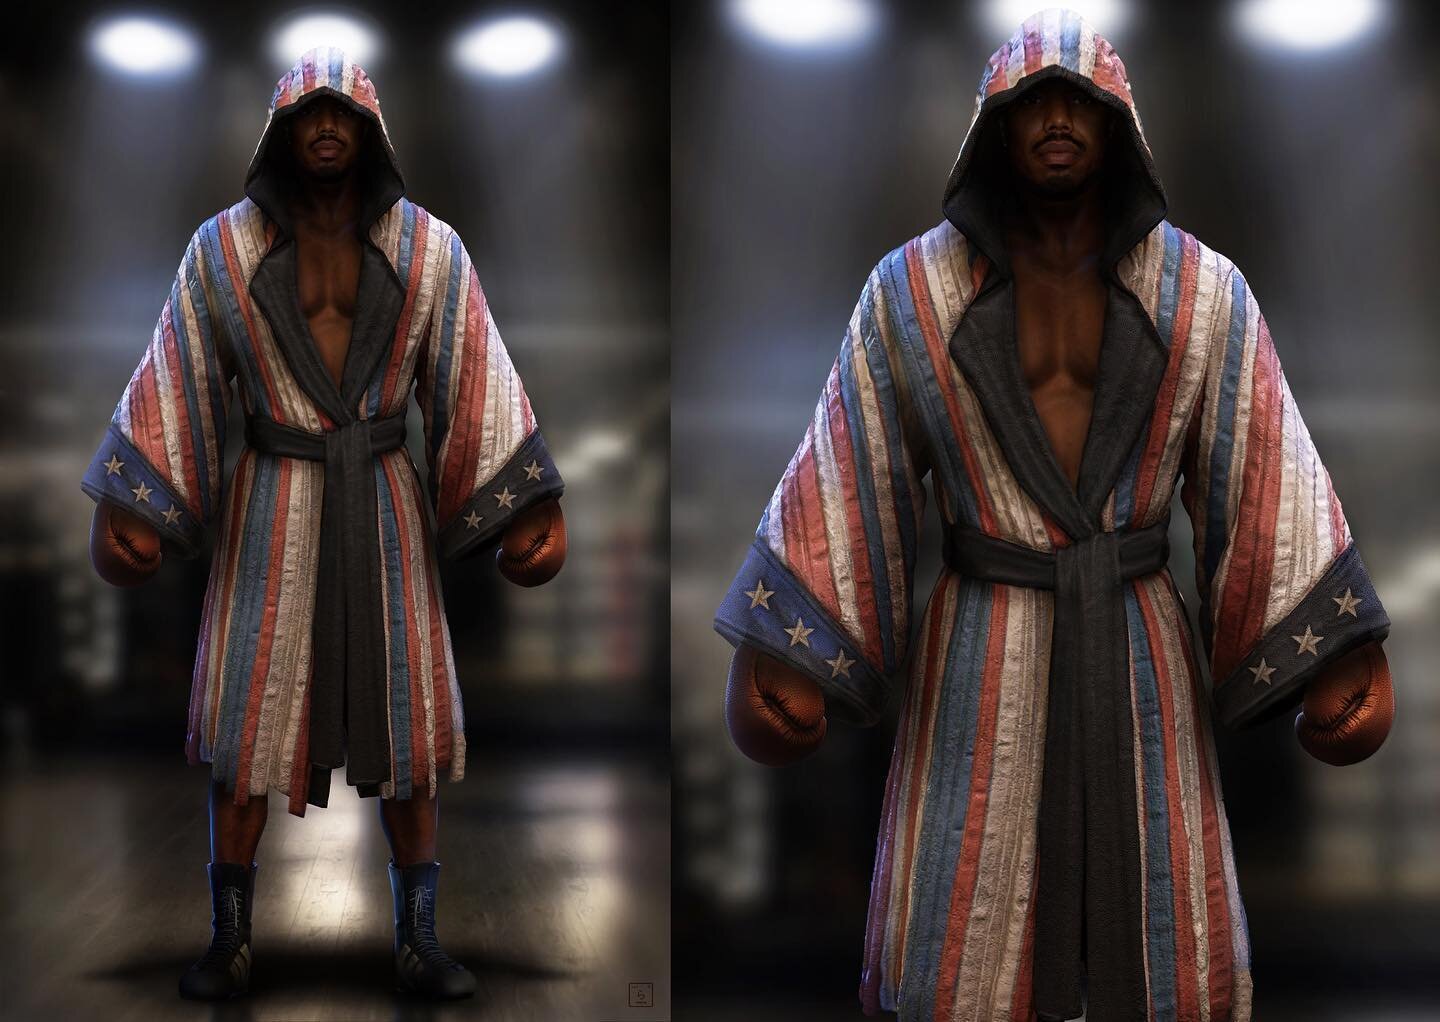 When Lizz recruited me onto Creed 3 in 2021, it&rsquo;s safe to say that we as country had collectively, lived thru some craziness.  After a lot of conversation, the idea of draping Adonis/Michael in the American flag regalia of Apollo Creed felt rat